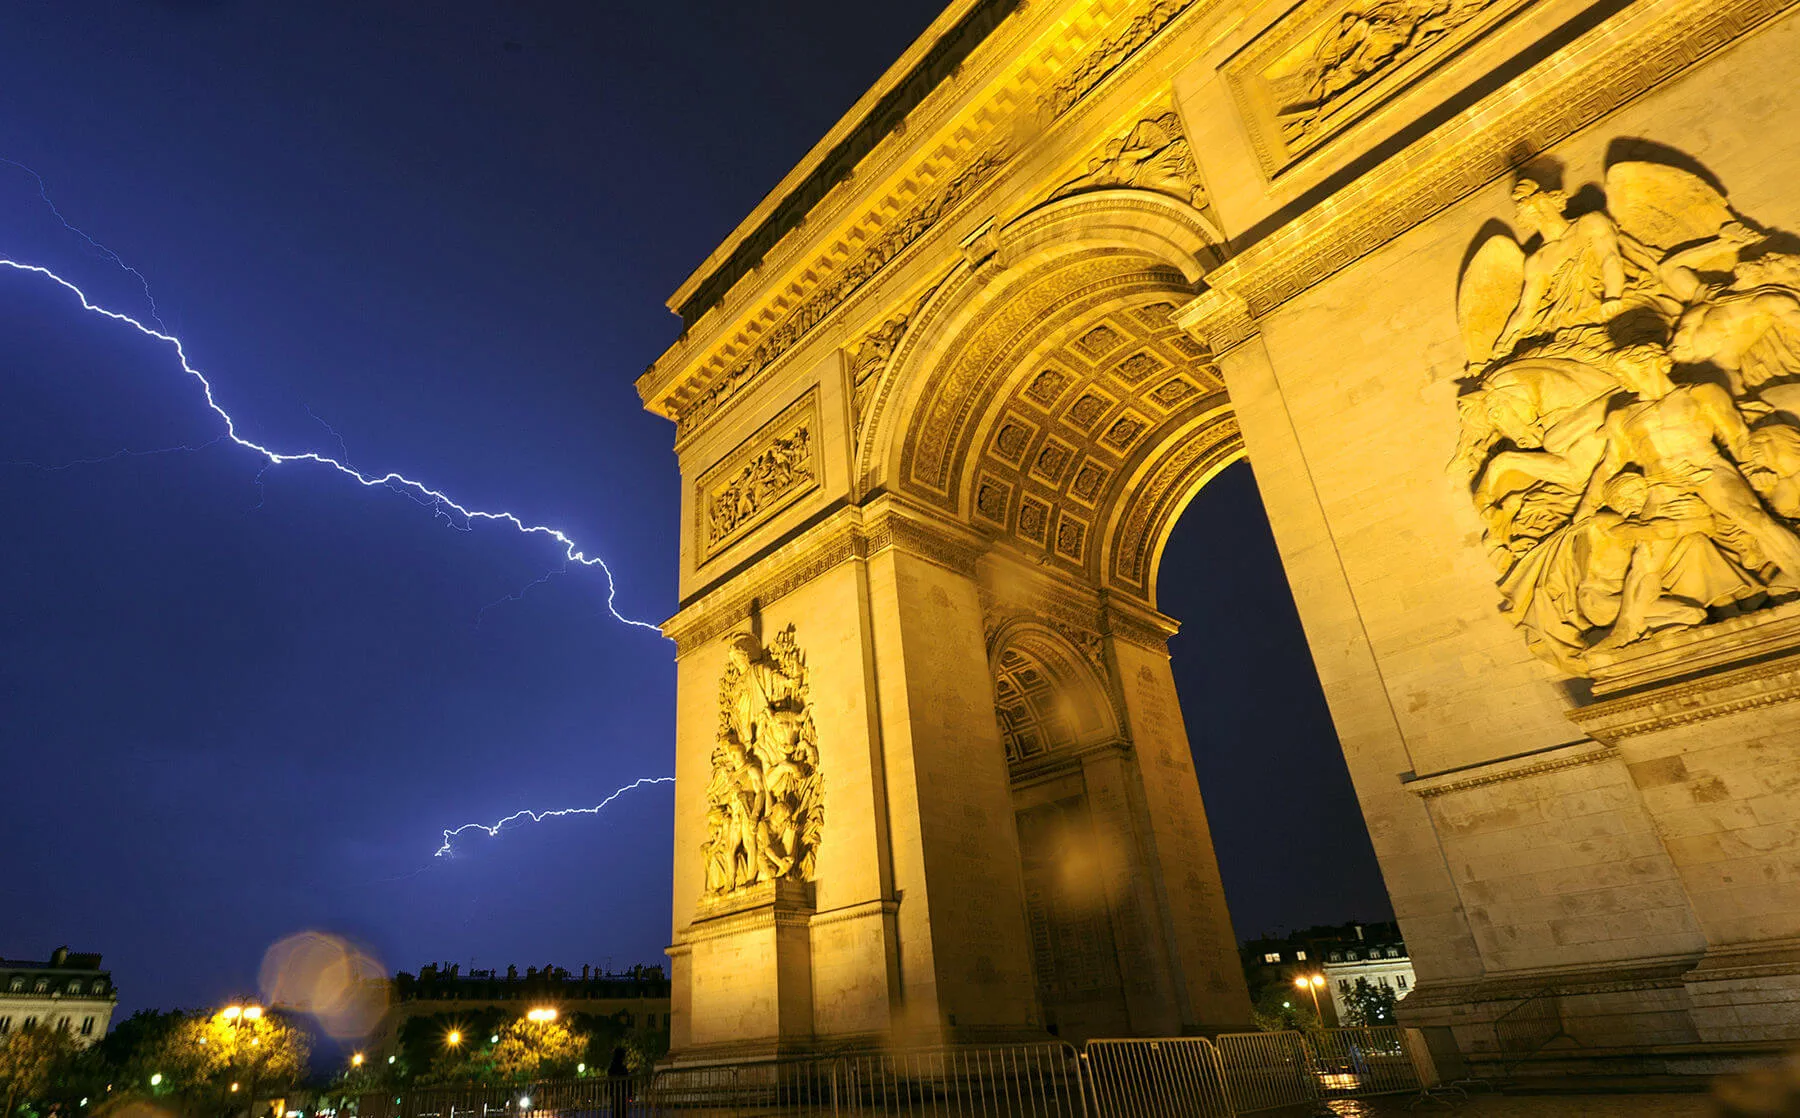 The dramatic Arc de Triomphe, built to honor Napoleon's victories, dominates Paris' skyline day and night